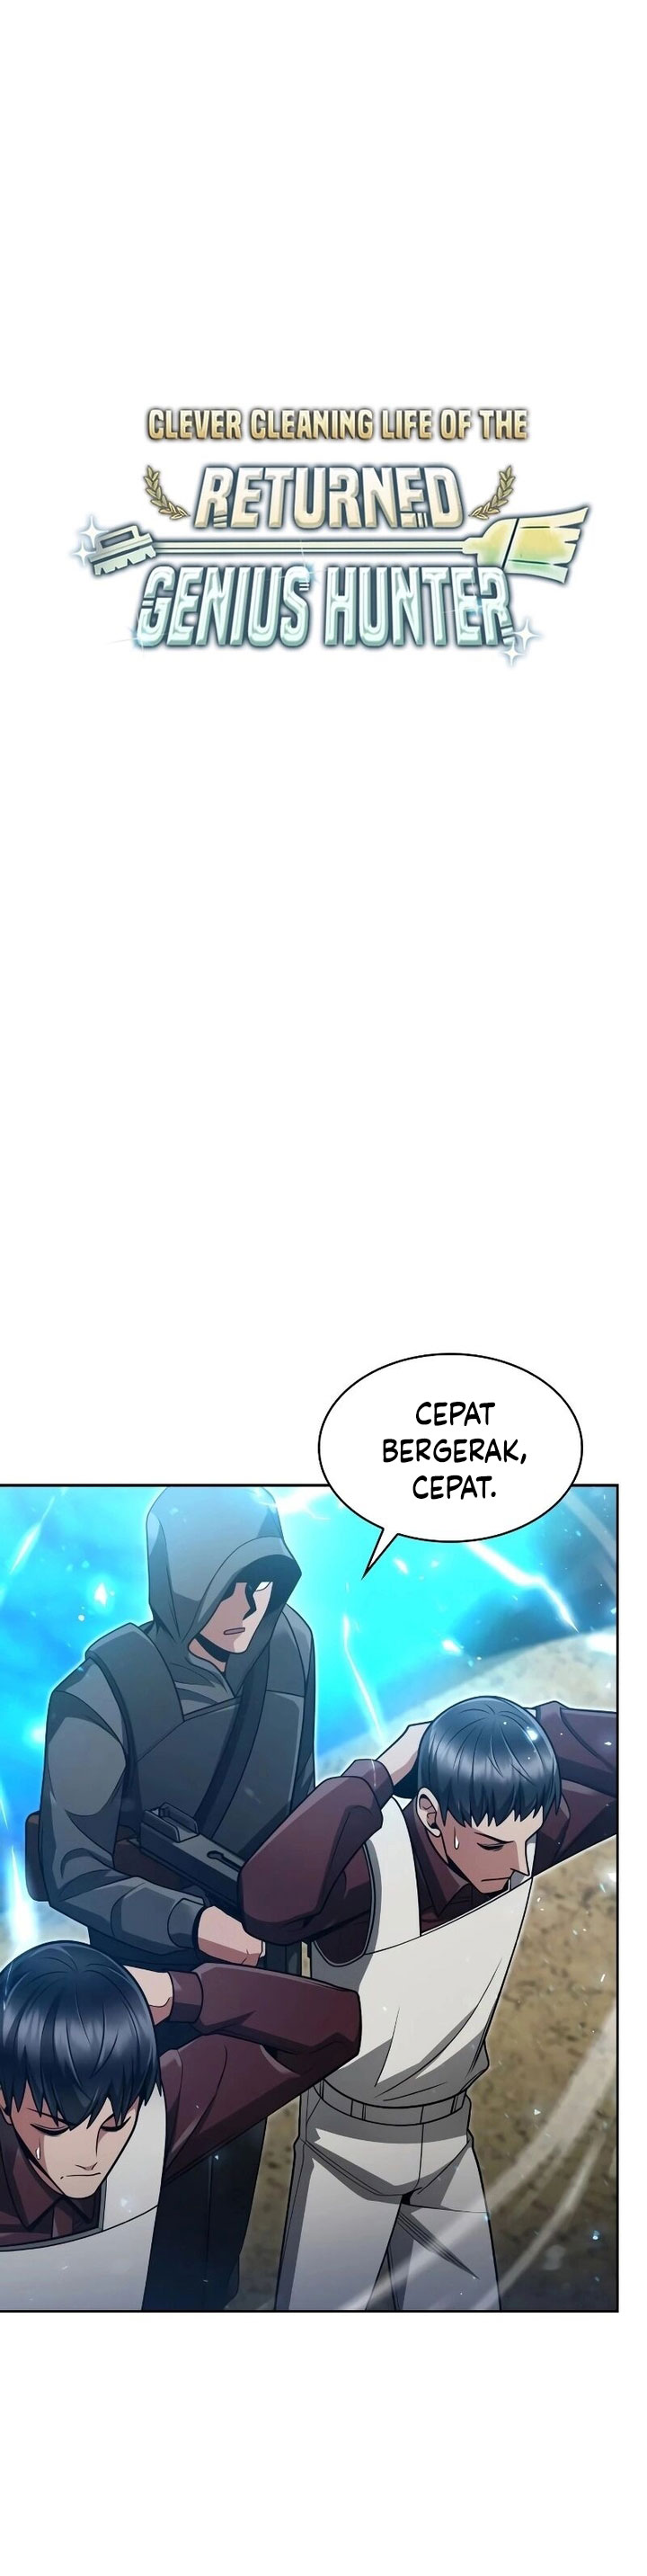 Dilarang COPAS - situs resmi www.mangacanblog.com - Komik clever cleaning life of the returned genius hunter 065 - chapter 65 66 Indonesia clever cleaning life of the returned genius hunter 065 - chapter 65 Terbaru 6|Baca Manga Komik Indonesia|Mangacan